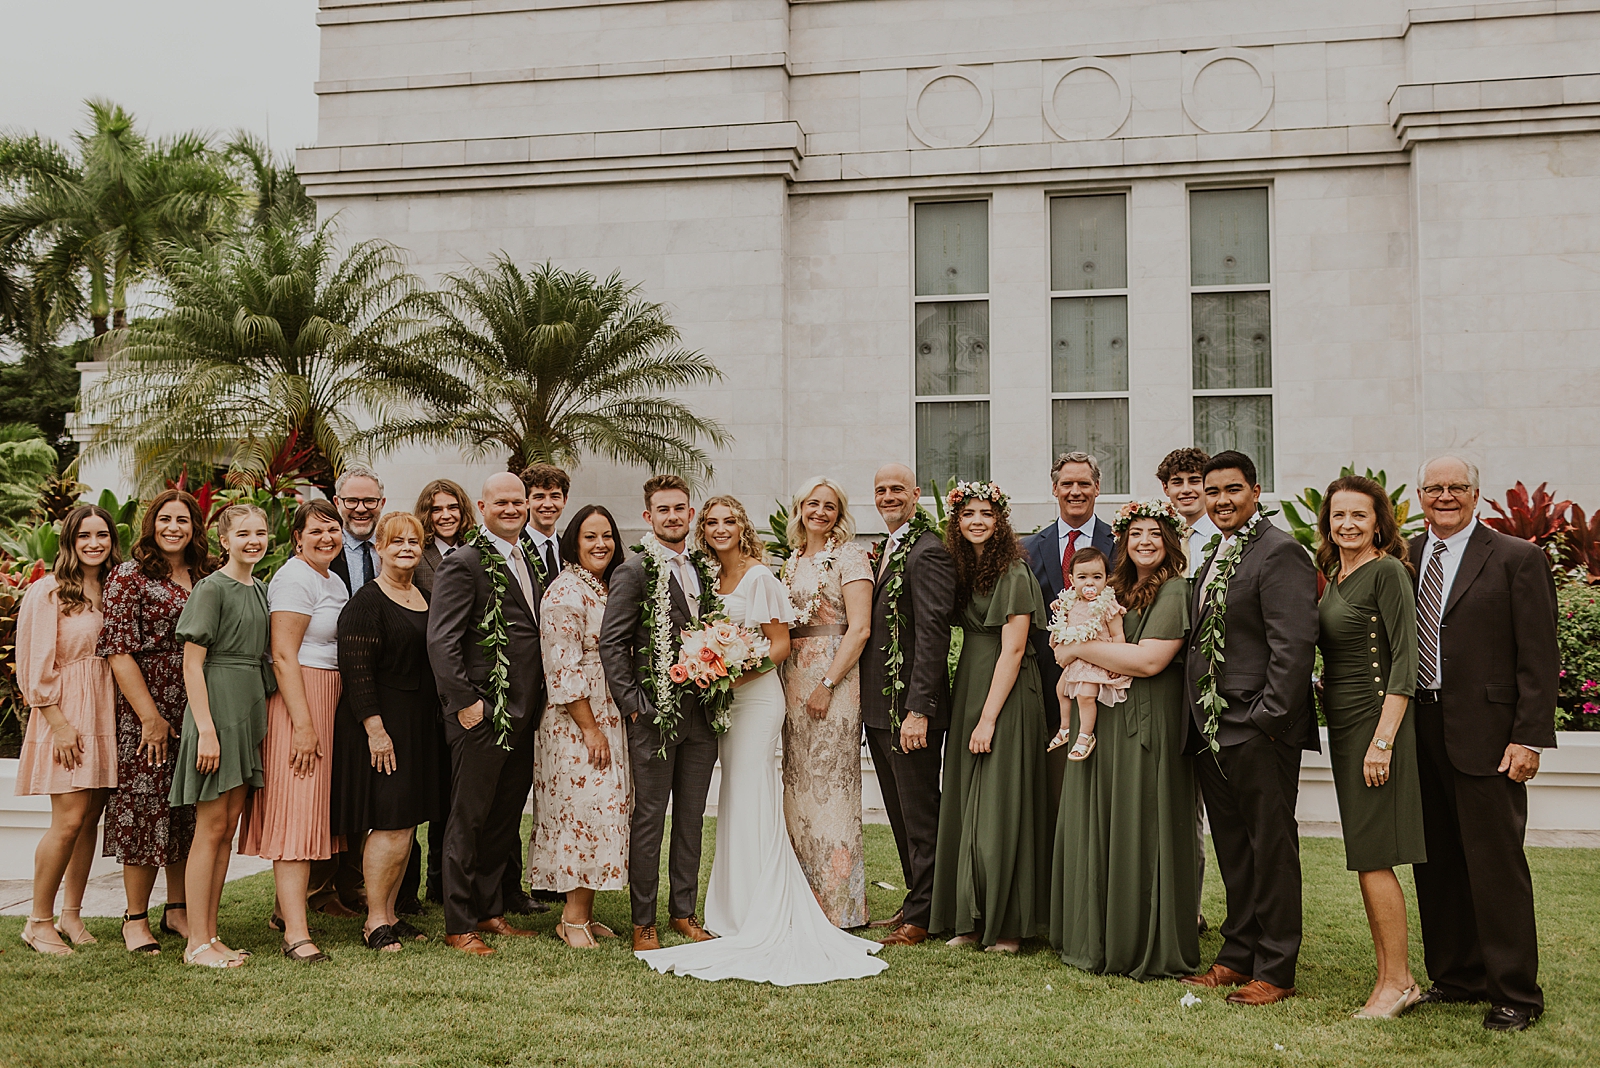 Bride and Groom with extended family portrait outside by palm trees